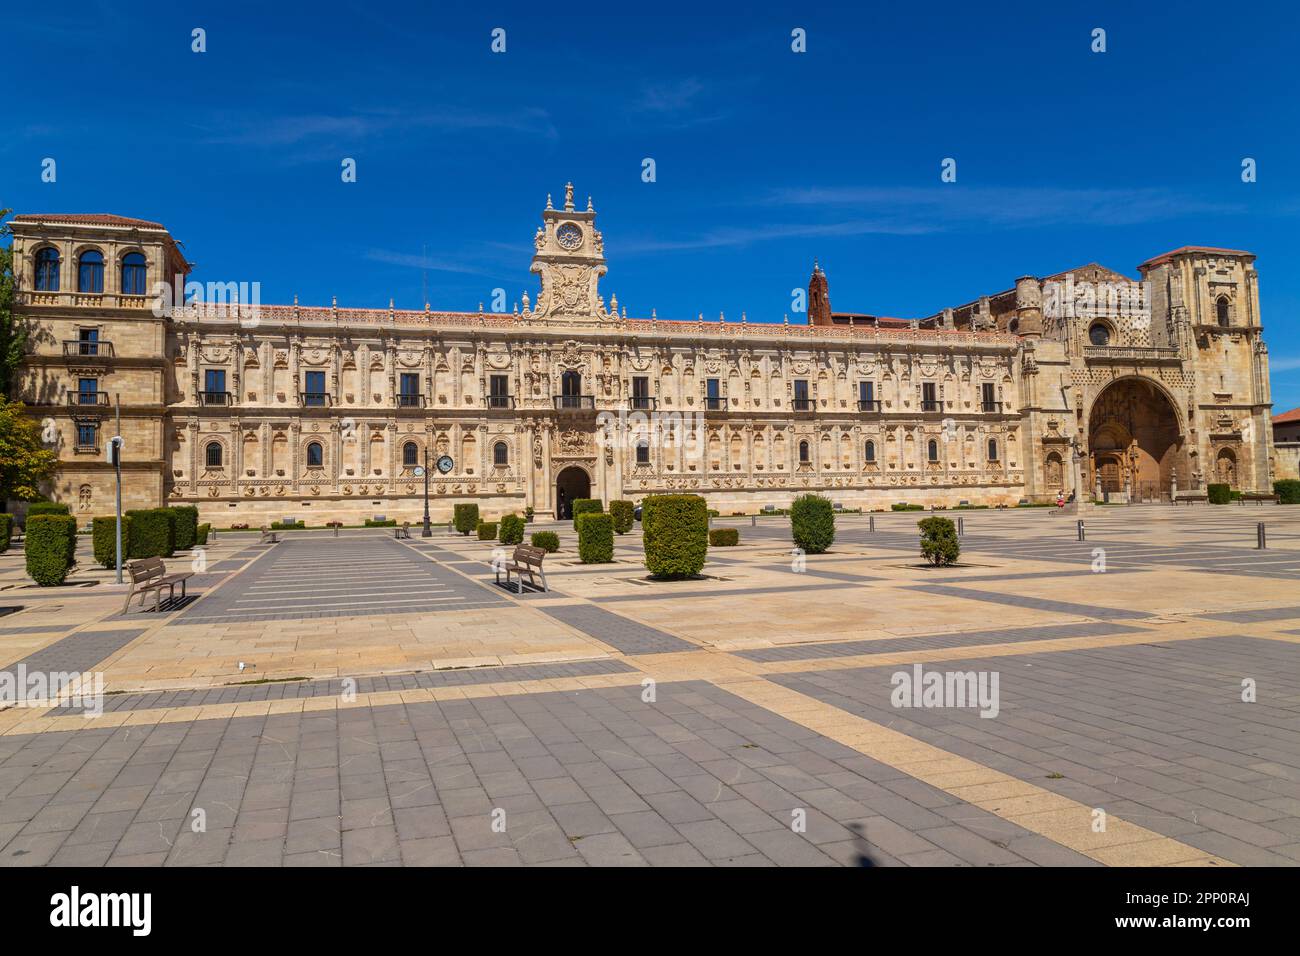 Leon, Spain - August 16, 2022: The Convent of San Marcos in Leon, Spain Stock Photo